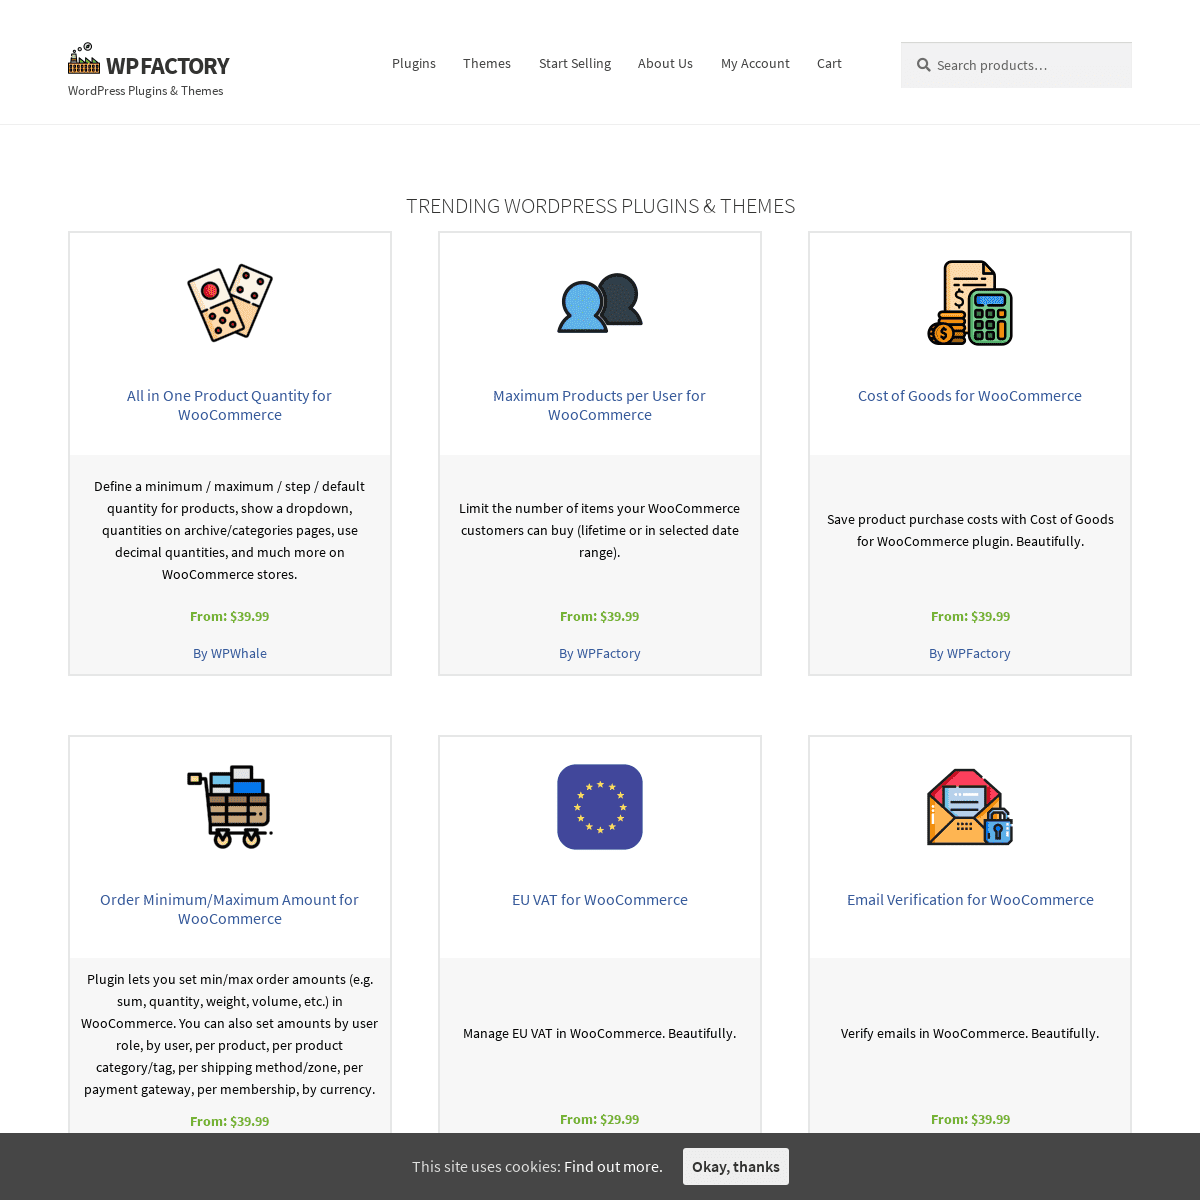 A complete backup of https://wpfactory.com